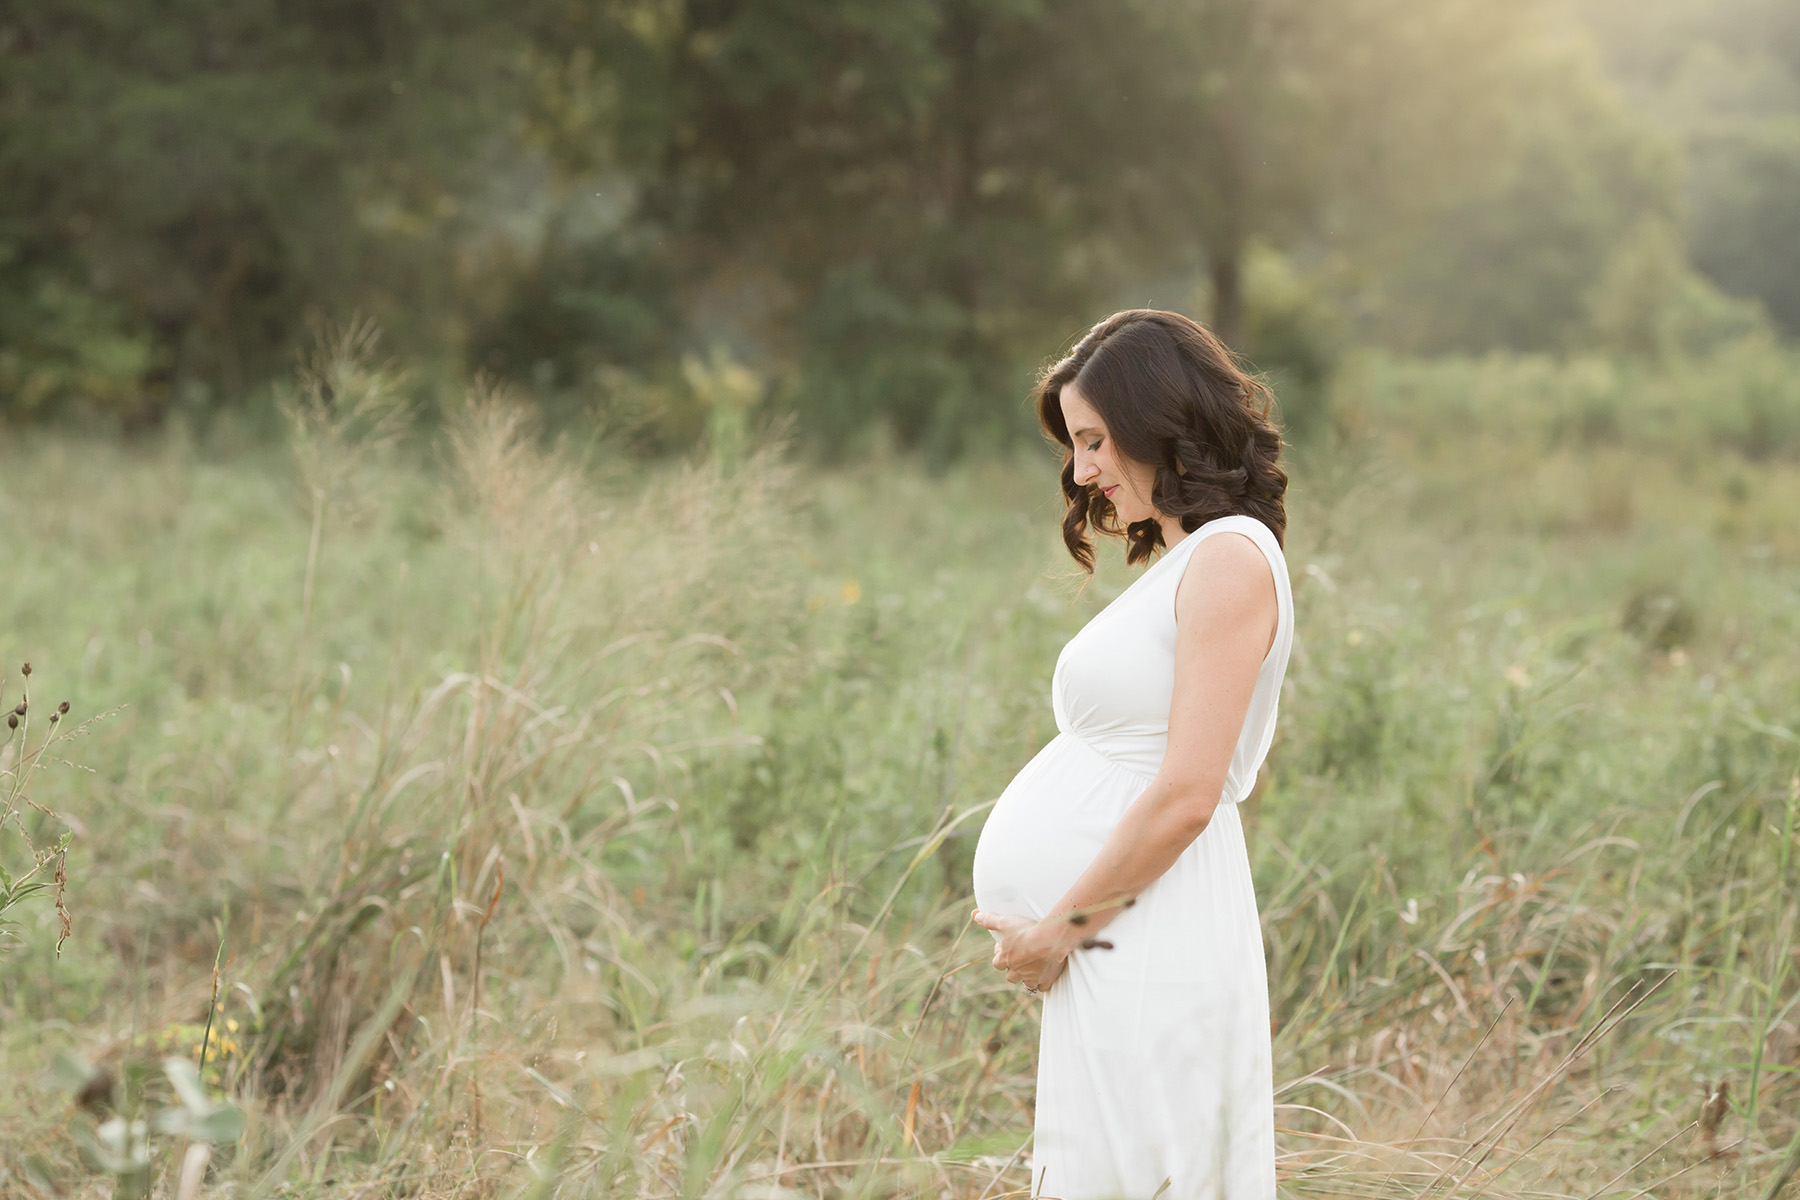 louisville-ky-maternity-photographer-southern-indiana-family-newborn-outdoor-pregnany-photo-session-julie-brock-photography-perfect-pregnancy-photo-dress